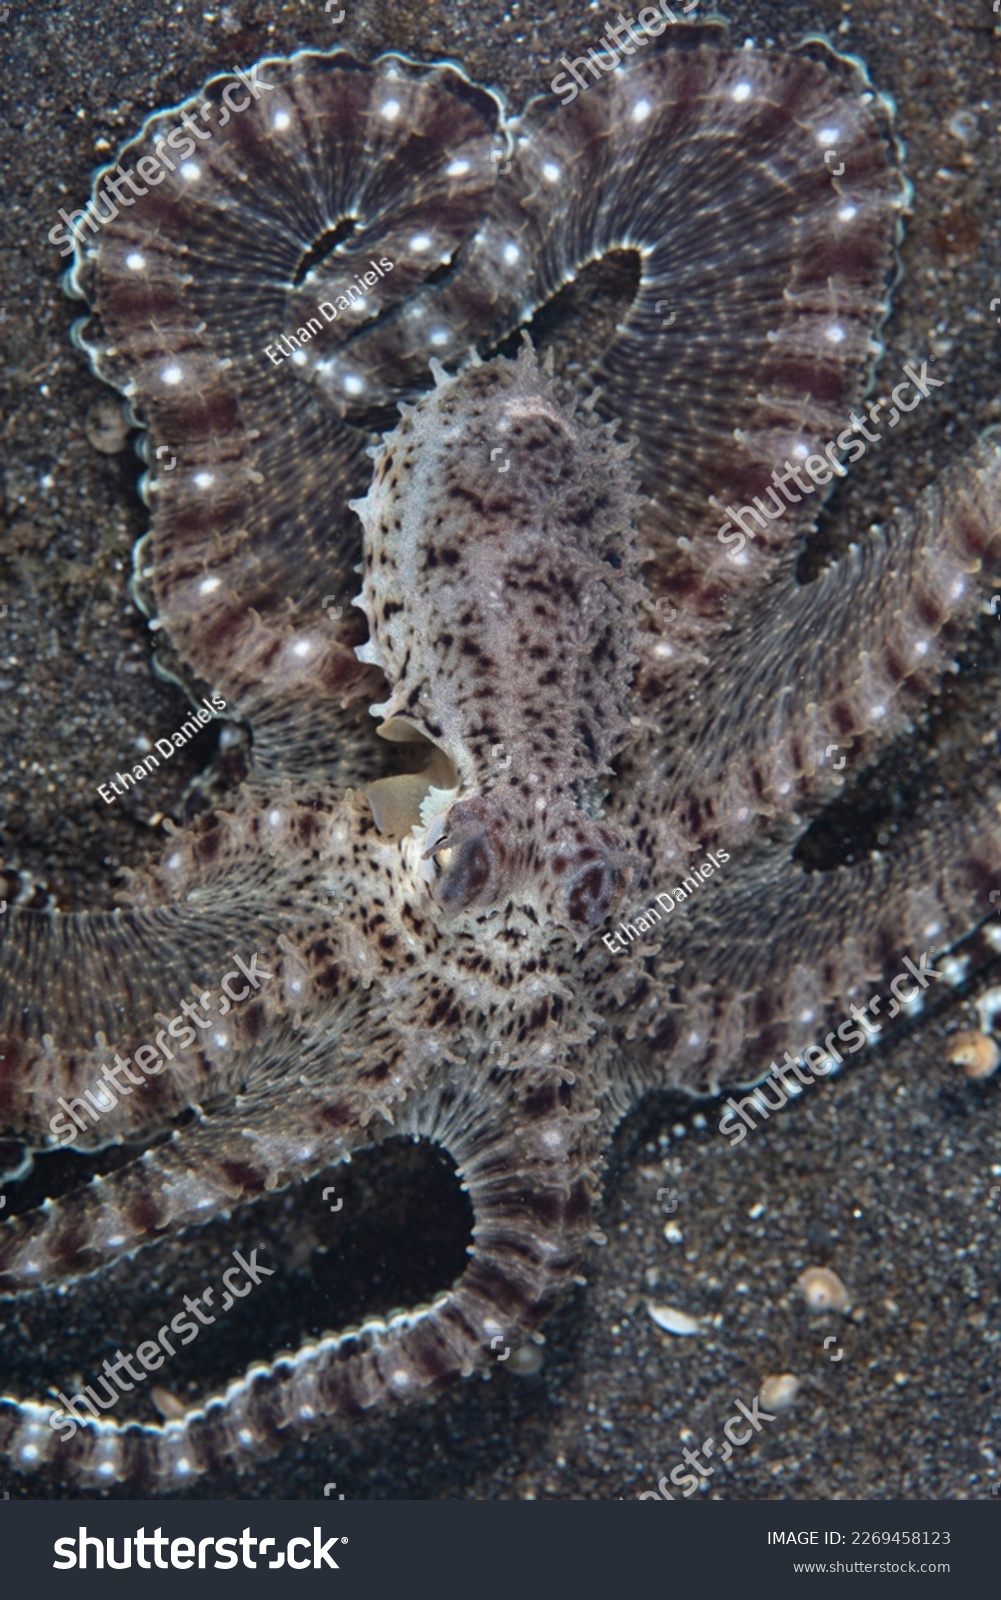 A Mimic octopus, Thaumoctopus mimicus, crawls across the black sand seafloor of Lembeh Strait, Indonesia. This unusual cephalopod species can impersonate a variety of other marine animals. #2269458123